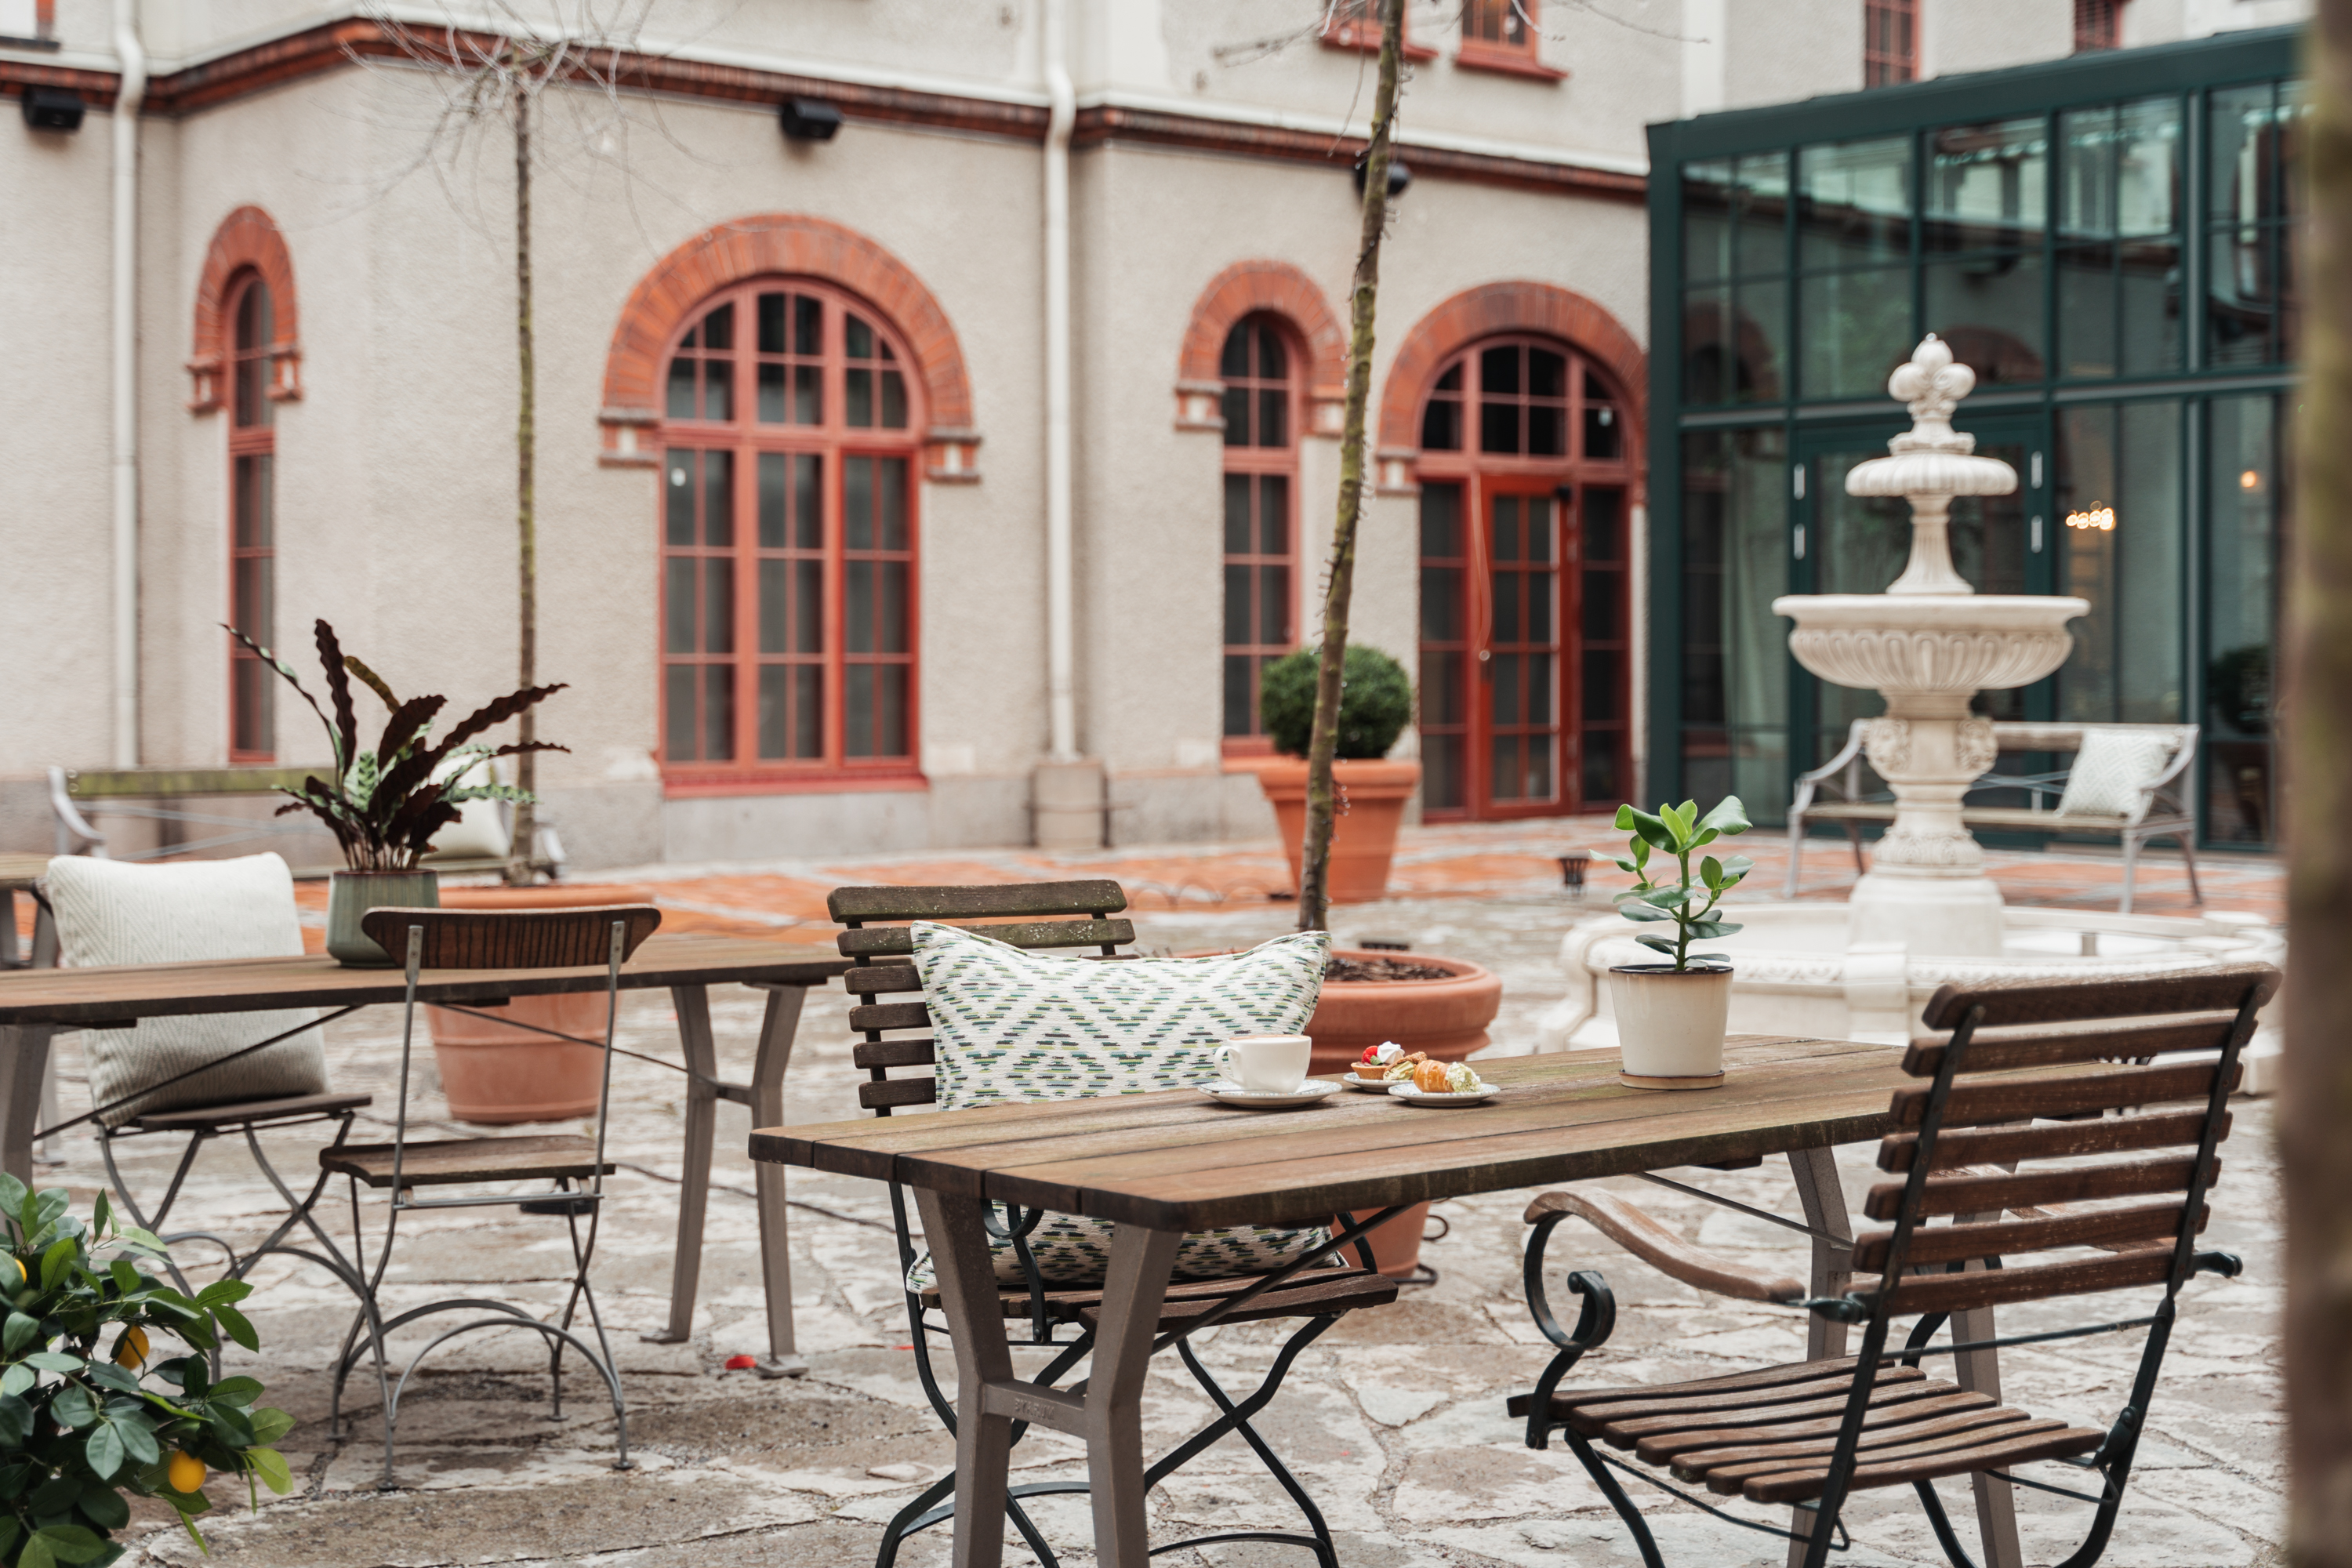 Outdoor seating with dining groups, fountains and plants